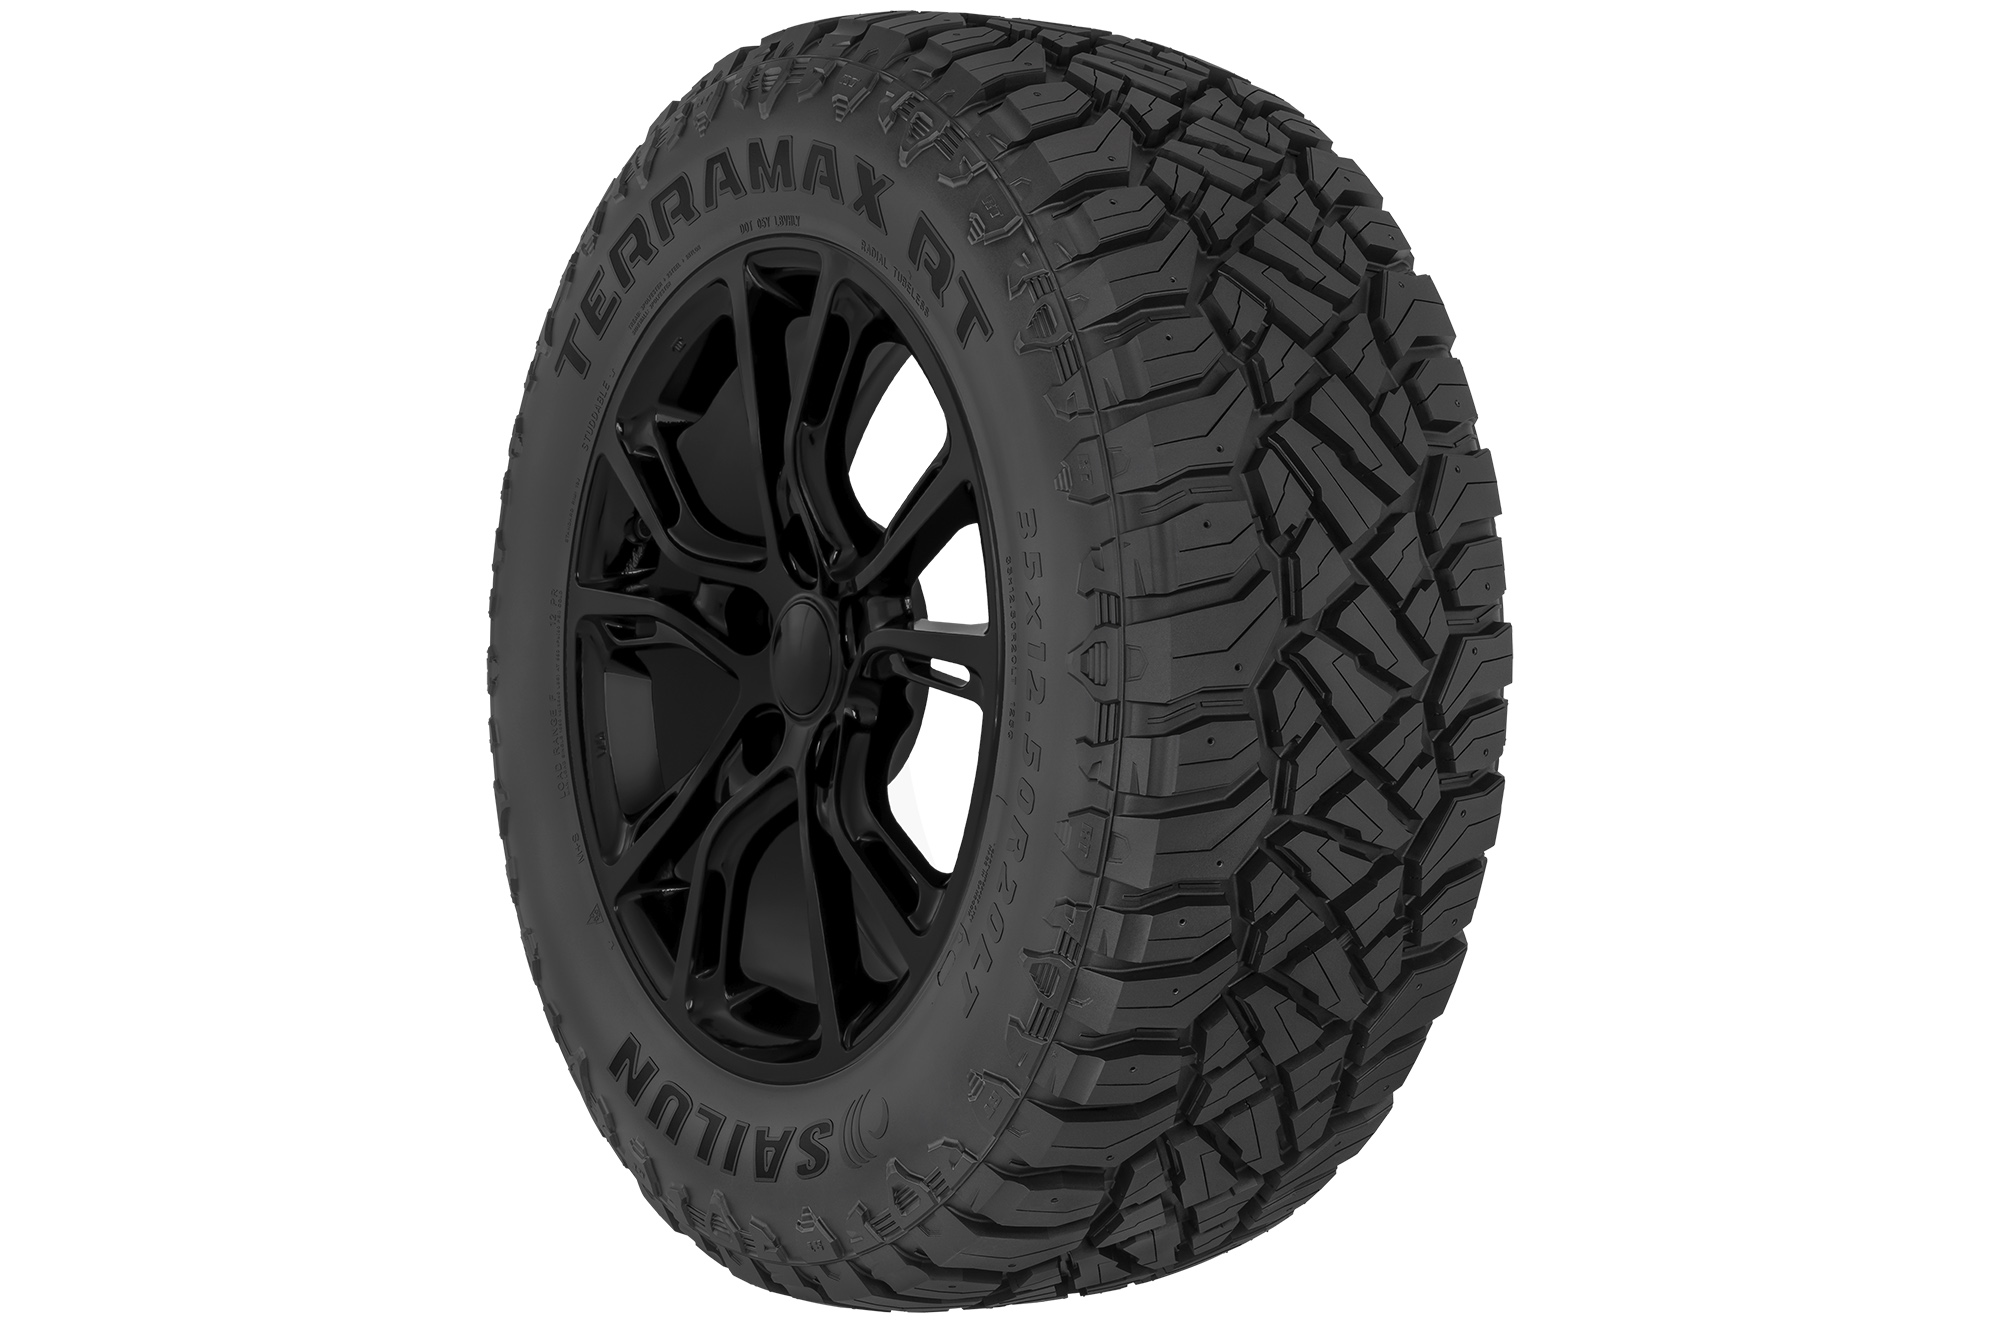 Rugged terrain tire stock photo shot from side-front angle